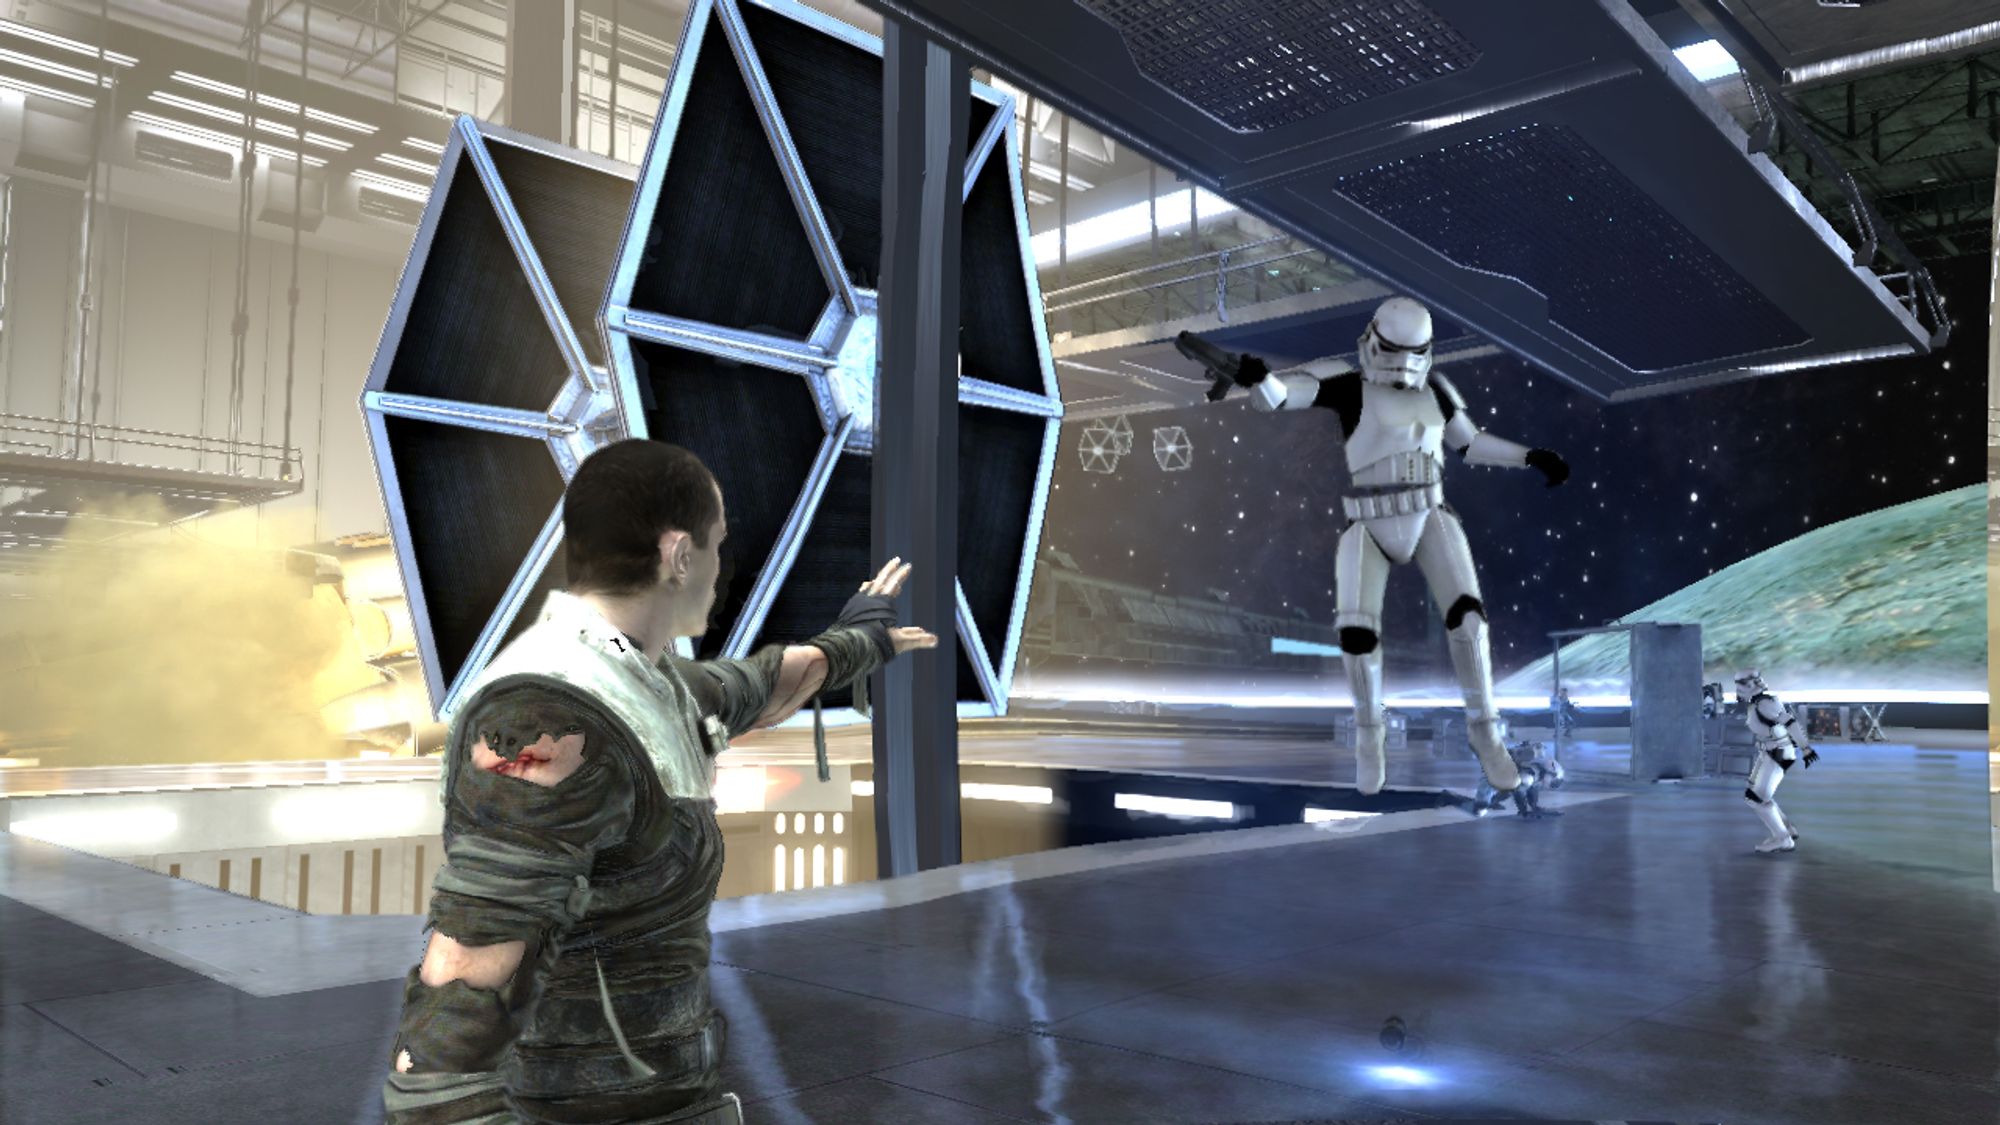 Игра star wars the force unleashed. Star Wars: the Force unleashed. Star Wars the Force unleashed 3. Star Wars: the Force unleashed - Ultimate Sith Edition. Star Wars the Force unleashed 2008.